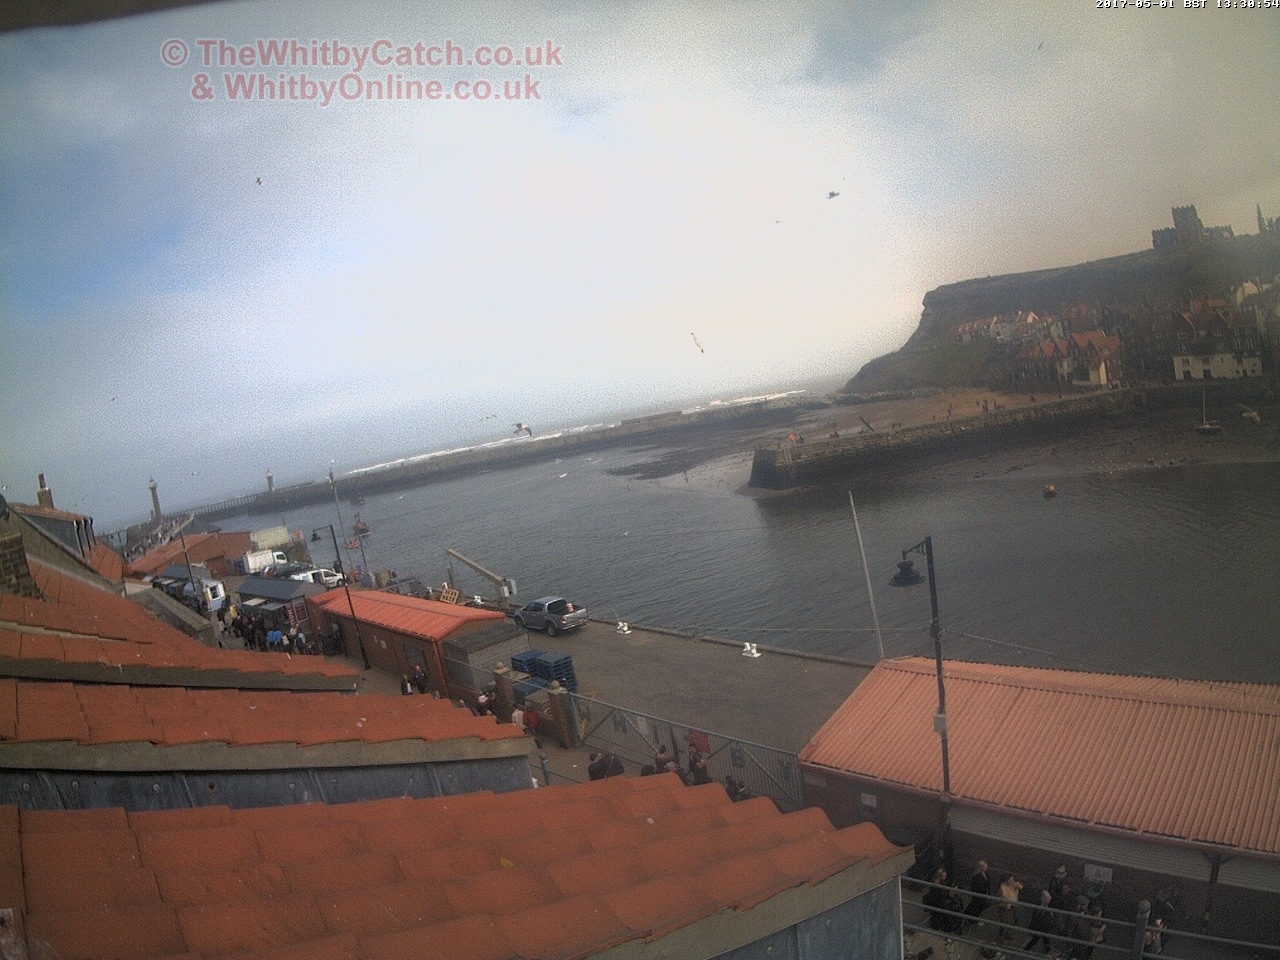 Whitby Mon 1st May 2017 13:31.